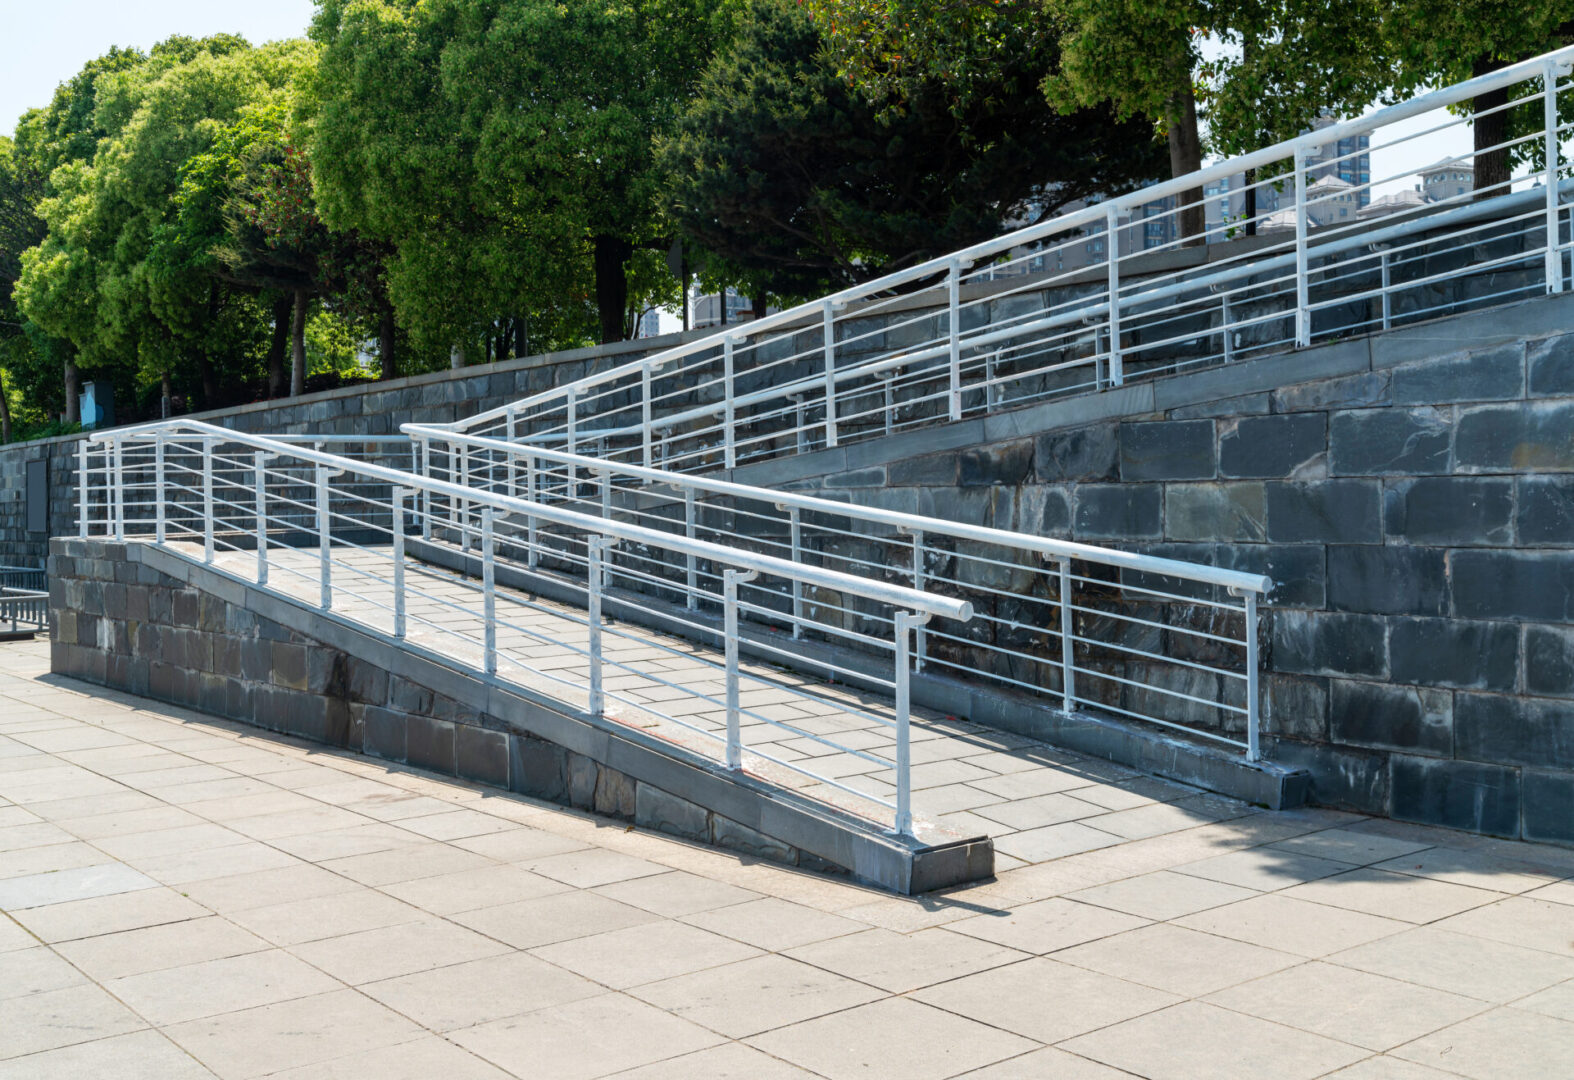 A concrete walkway with metal railing and steps.